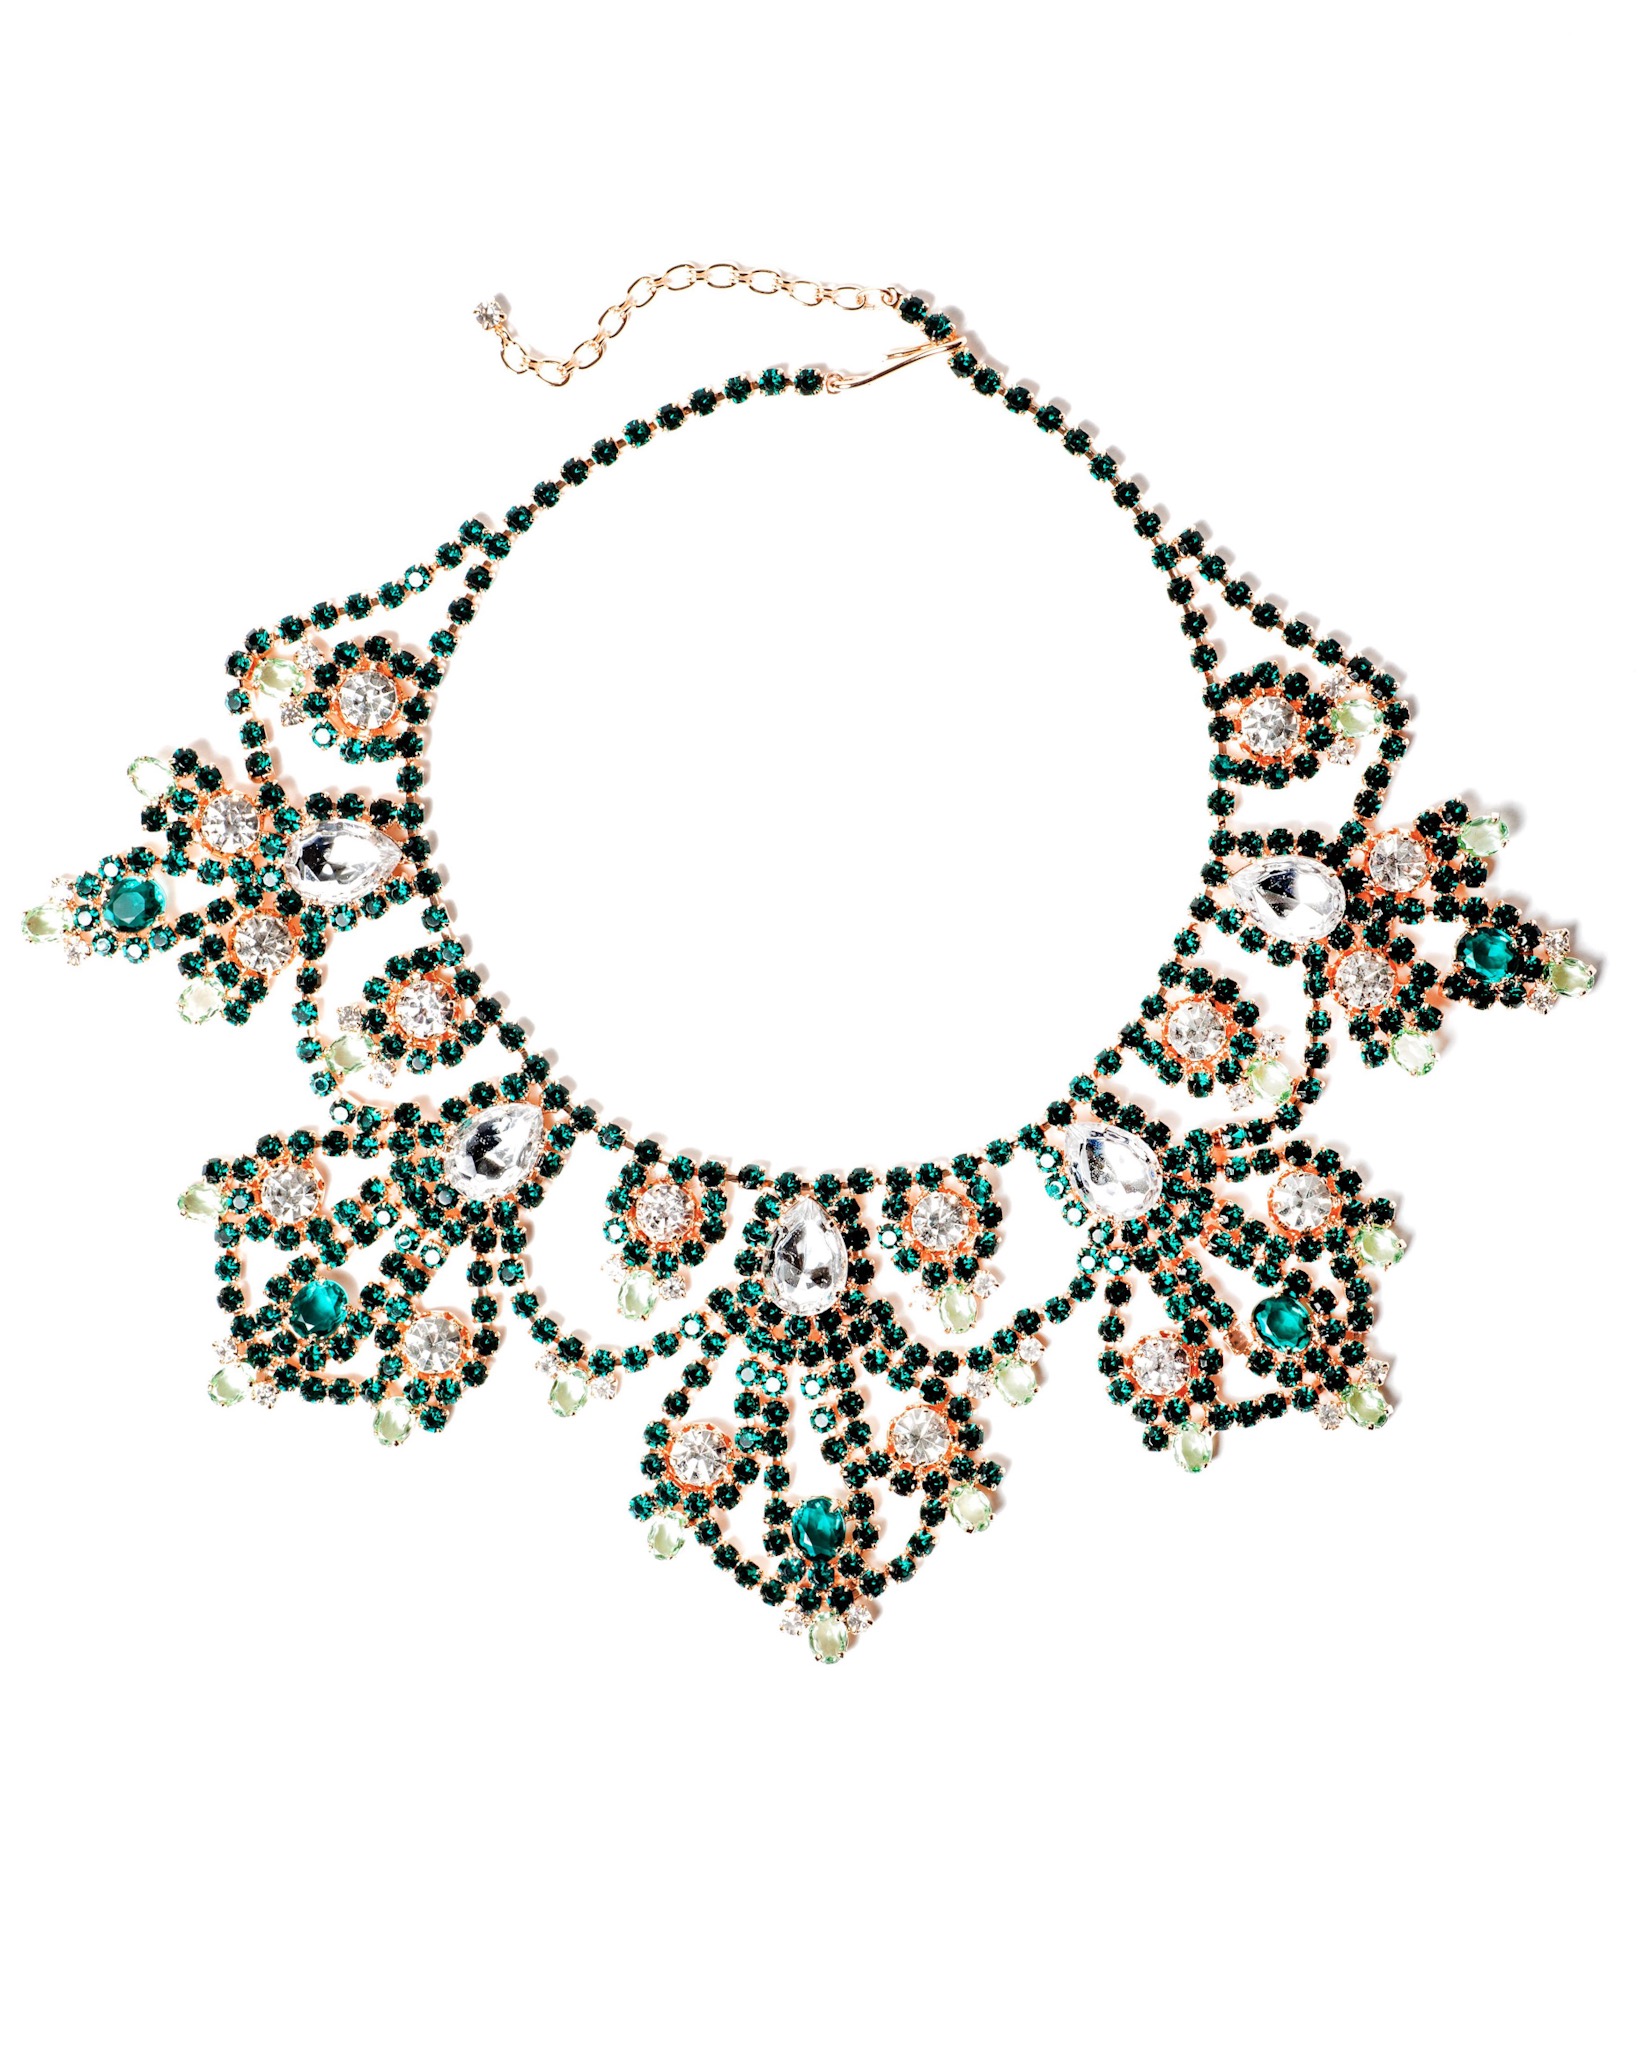 Emerald Green and Diamanté Crystal Rose Gold Statement Necklace, circa ...